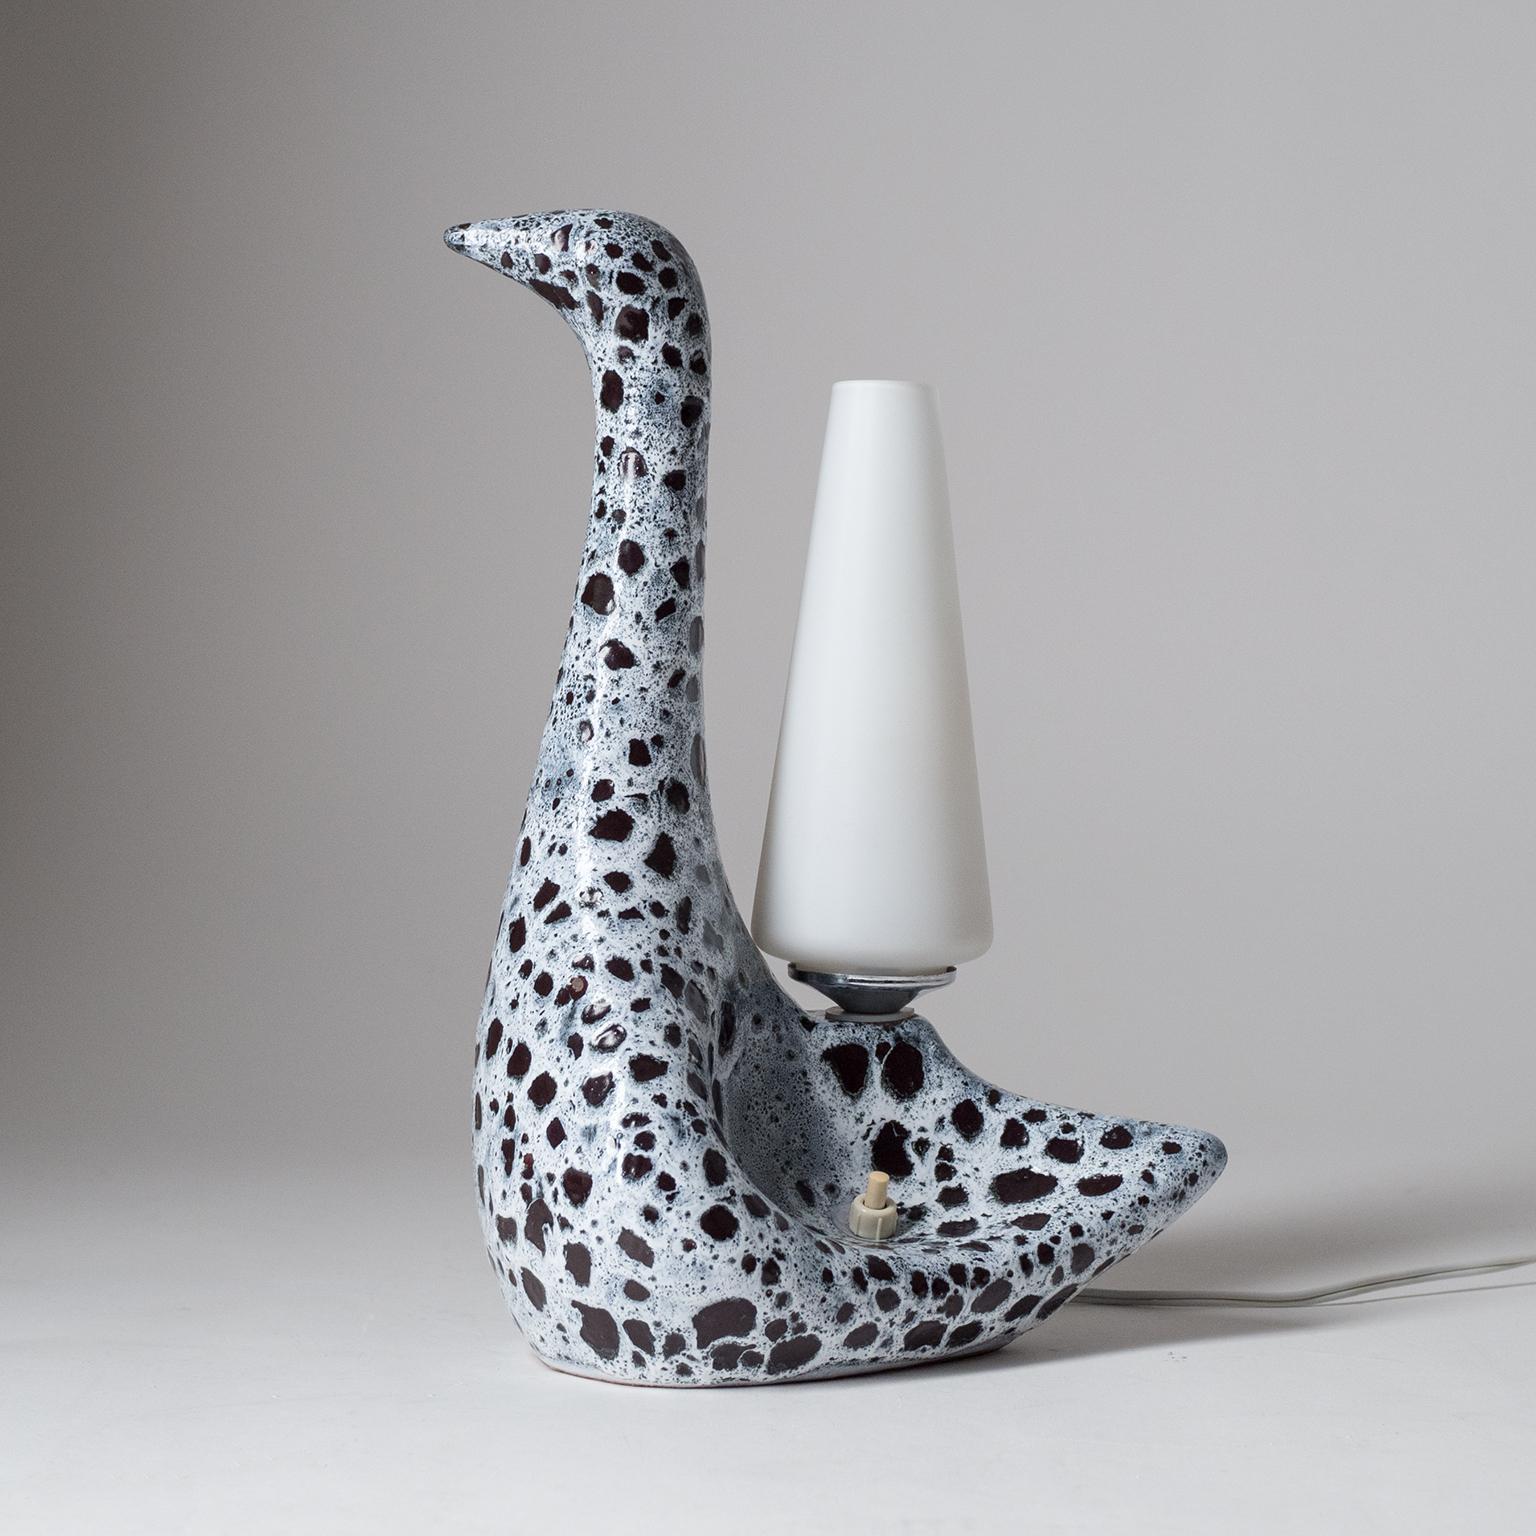 Rare French 'zoomorphe' ceramic table lamp by Le Vaucour, circa 1960. Graceful stylized swan or duck with a fat-lava glazing and a satin glass diffuser. One brass and ceramic E14 socket.